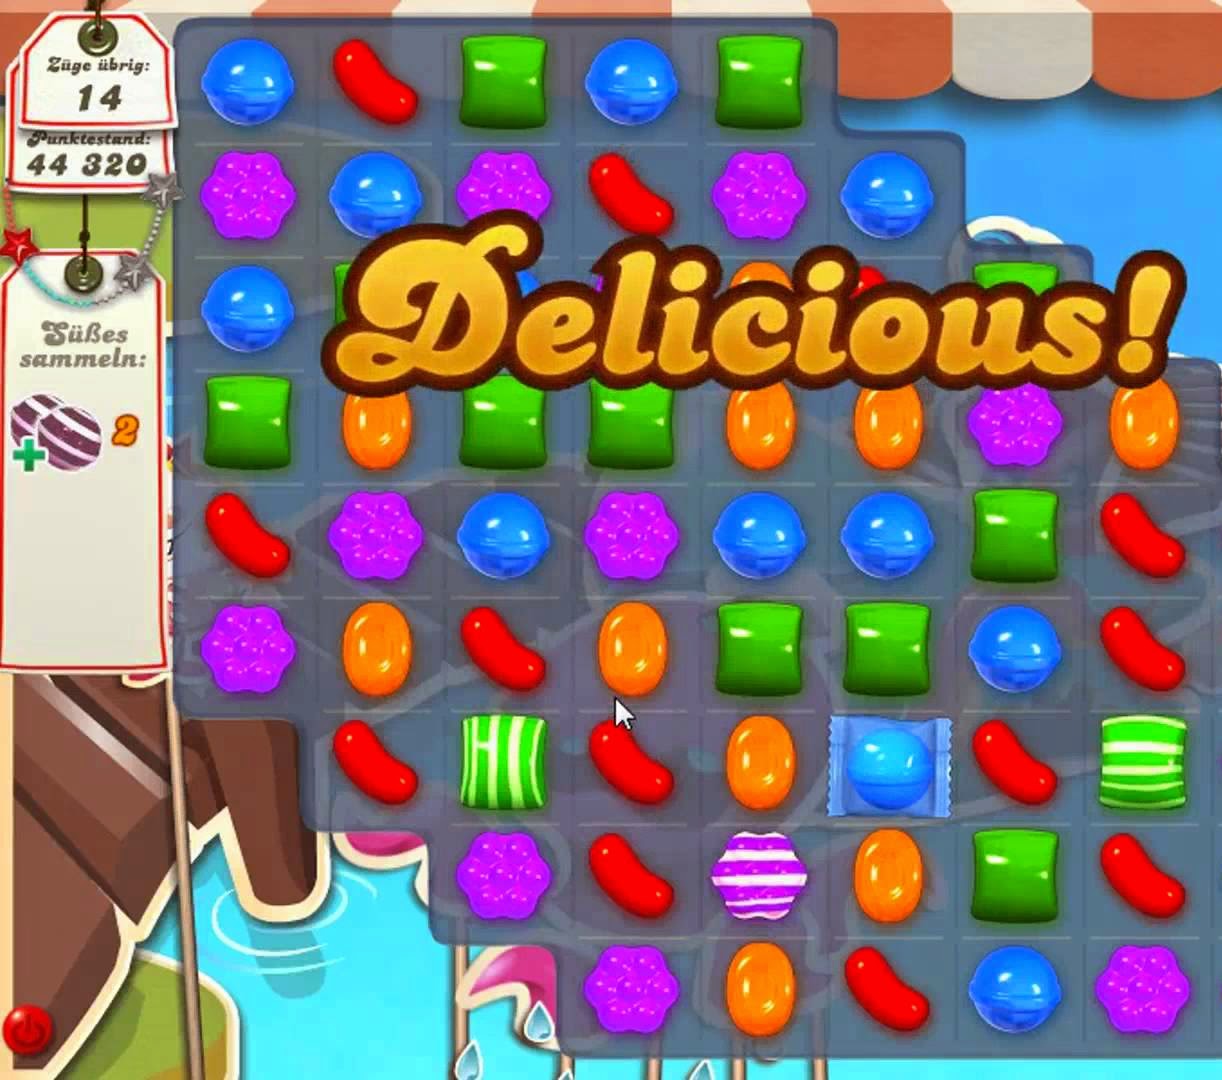 candy crush on pc download